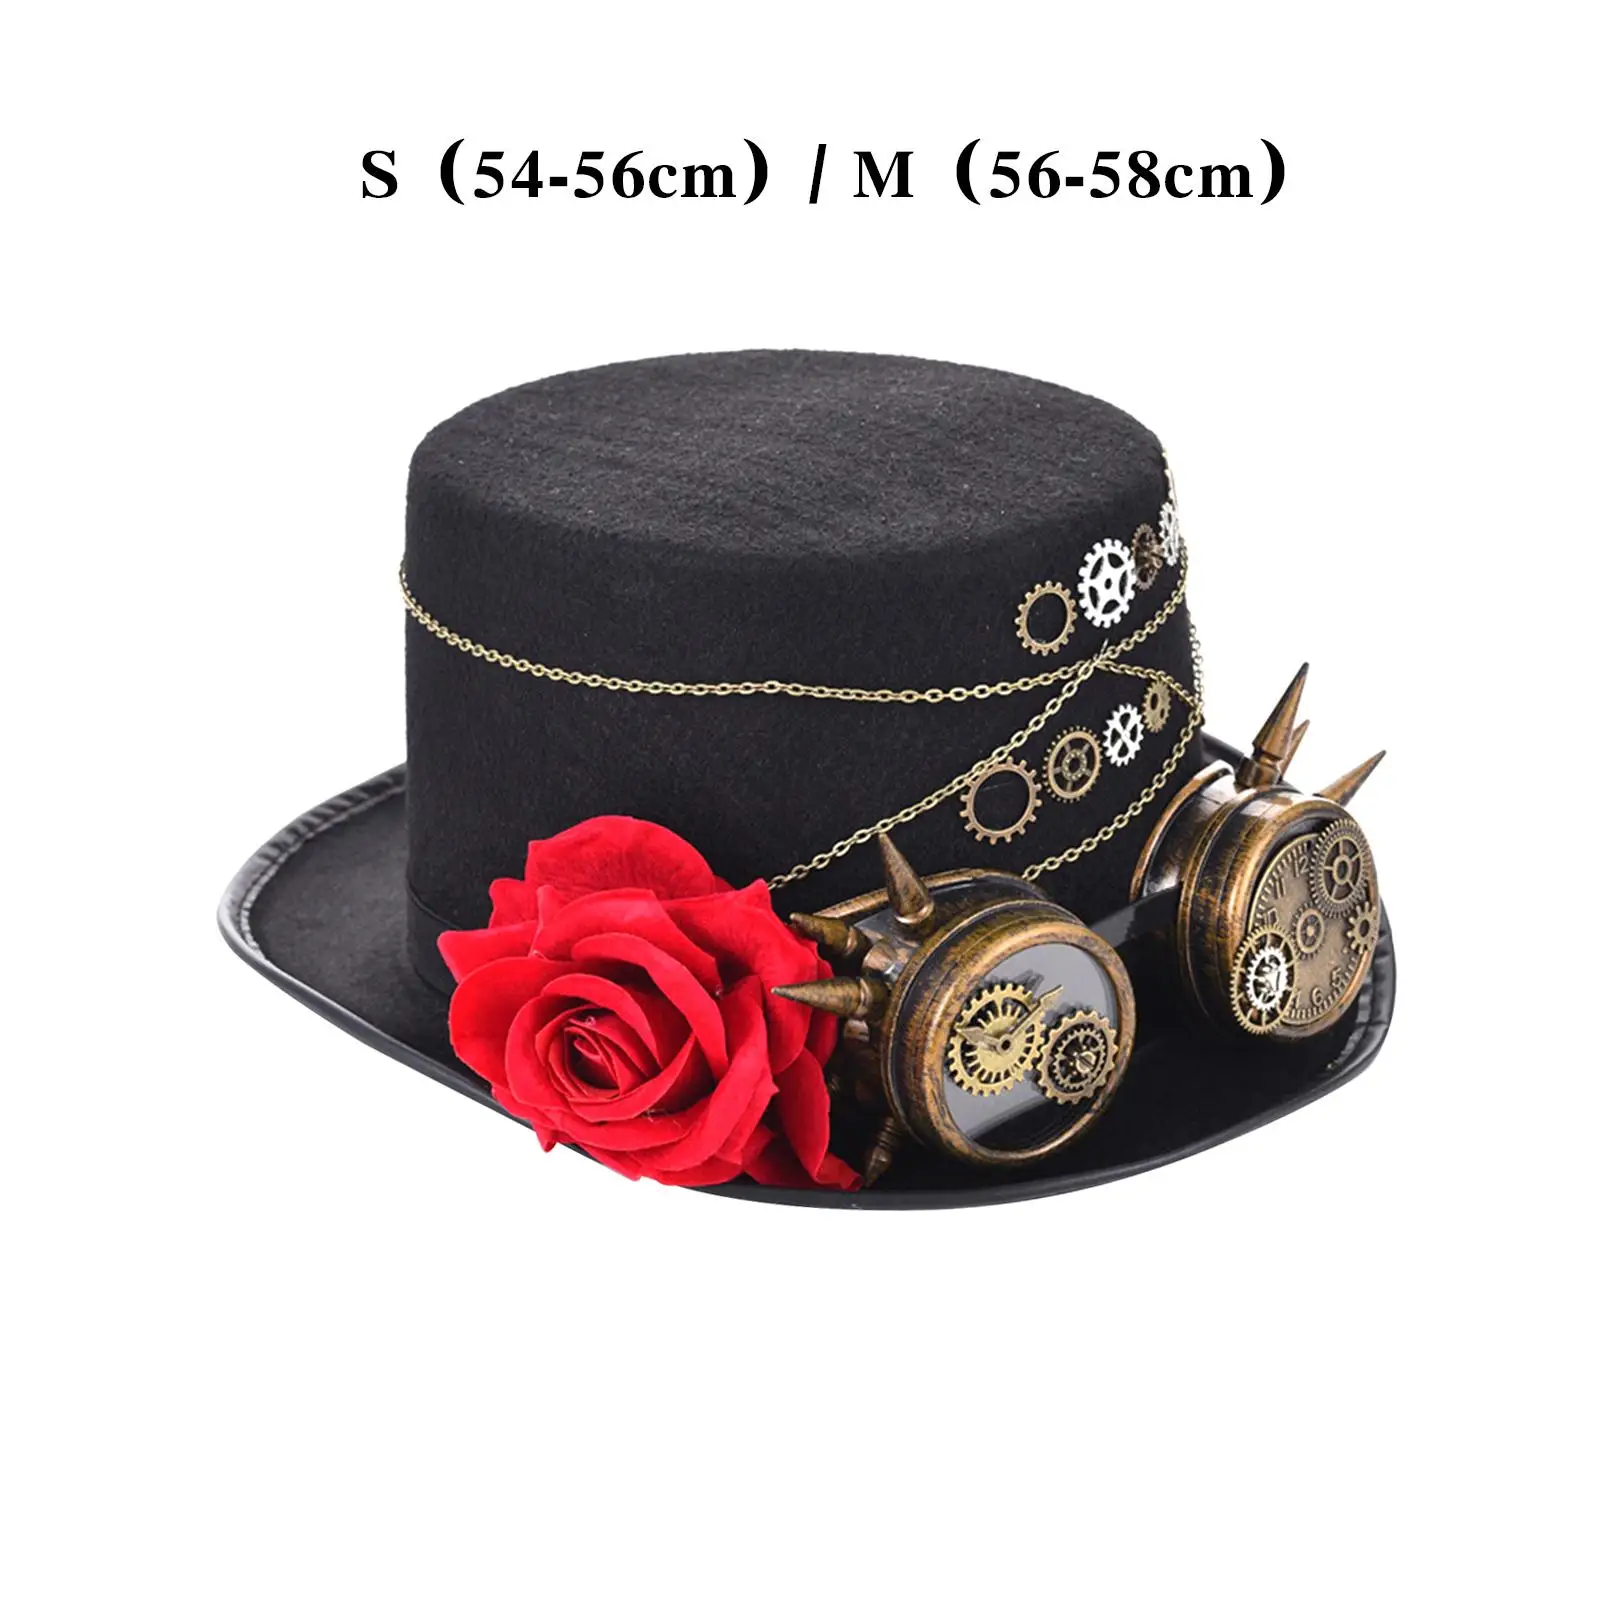 Retro Steampunk Hat with Goggles Flower Black Top Hat Industrial Age Costume